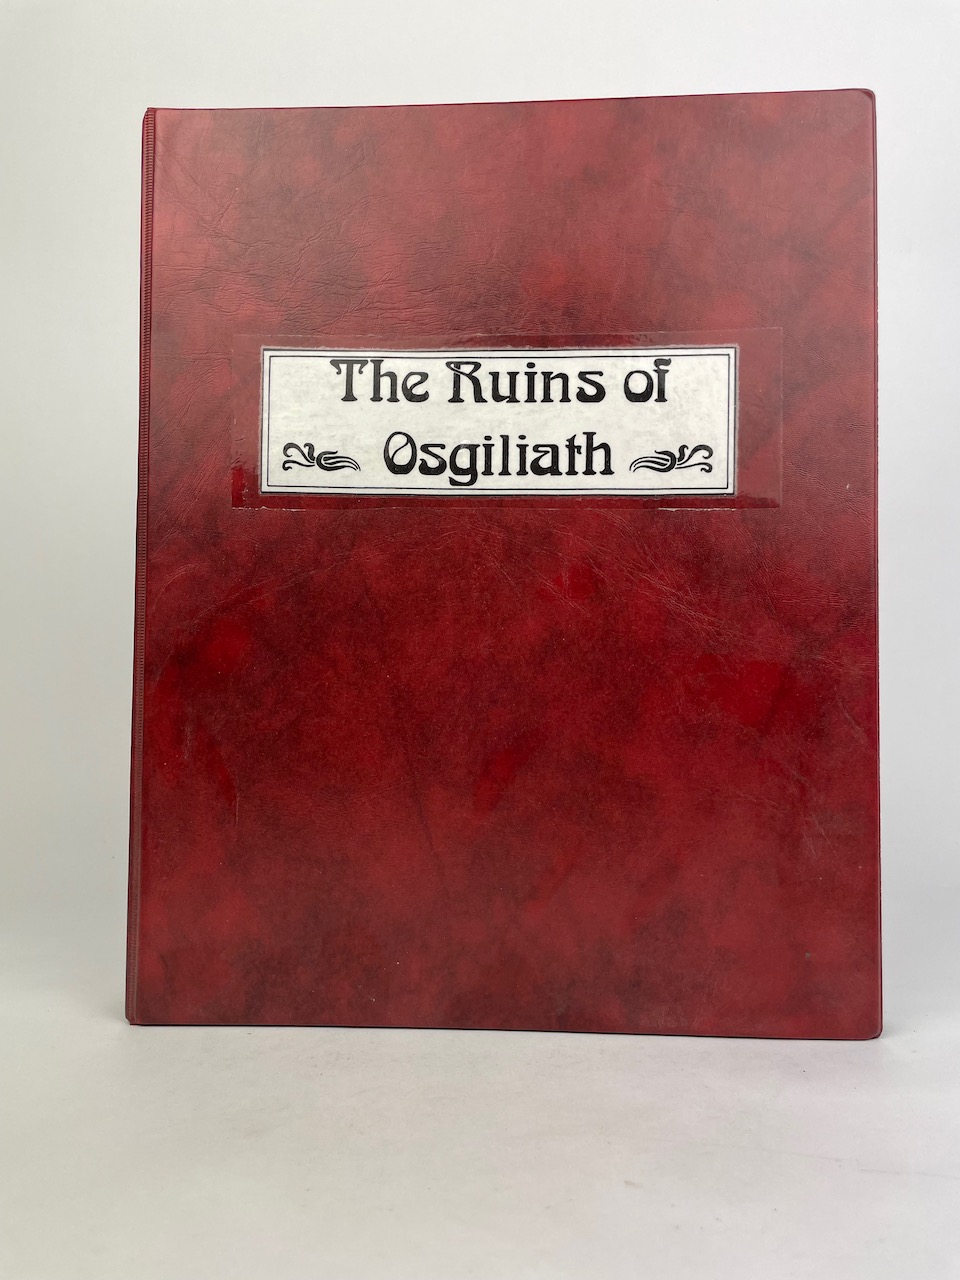 The Complete Ruins of Osgiliath, Signed Limited Numbered Edition, nr 9 of 12